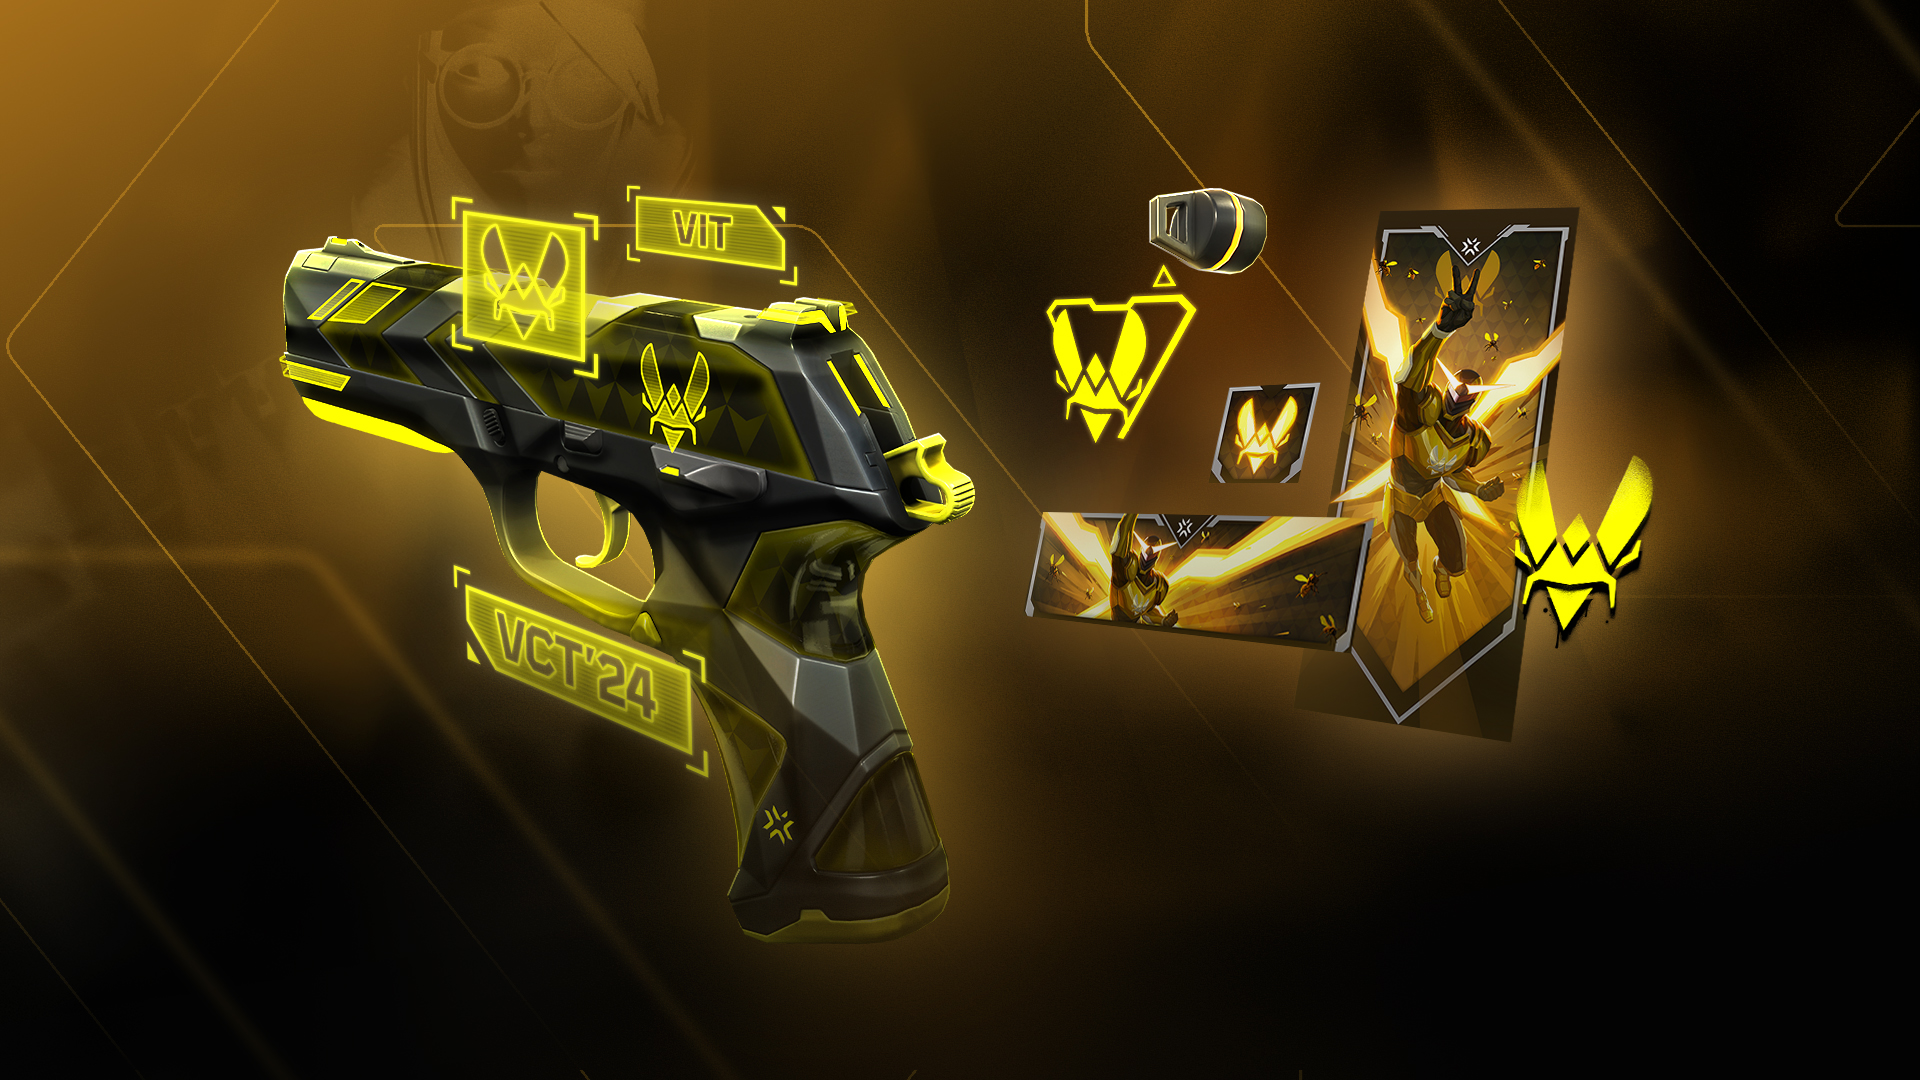 Team Vitality VCT Team Capsule. (Image Credits: Riot Games)